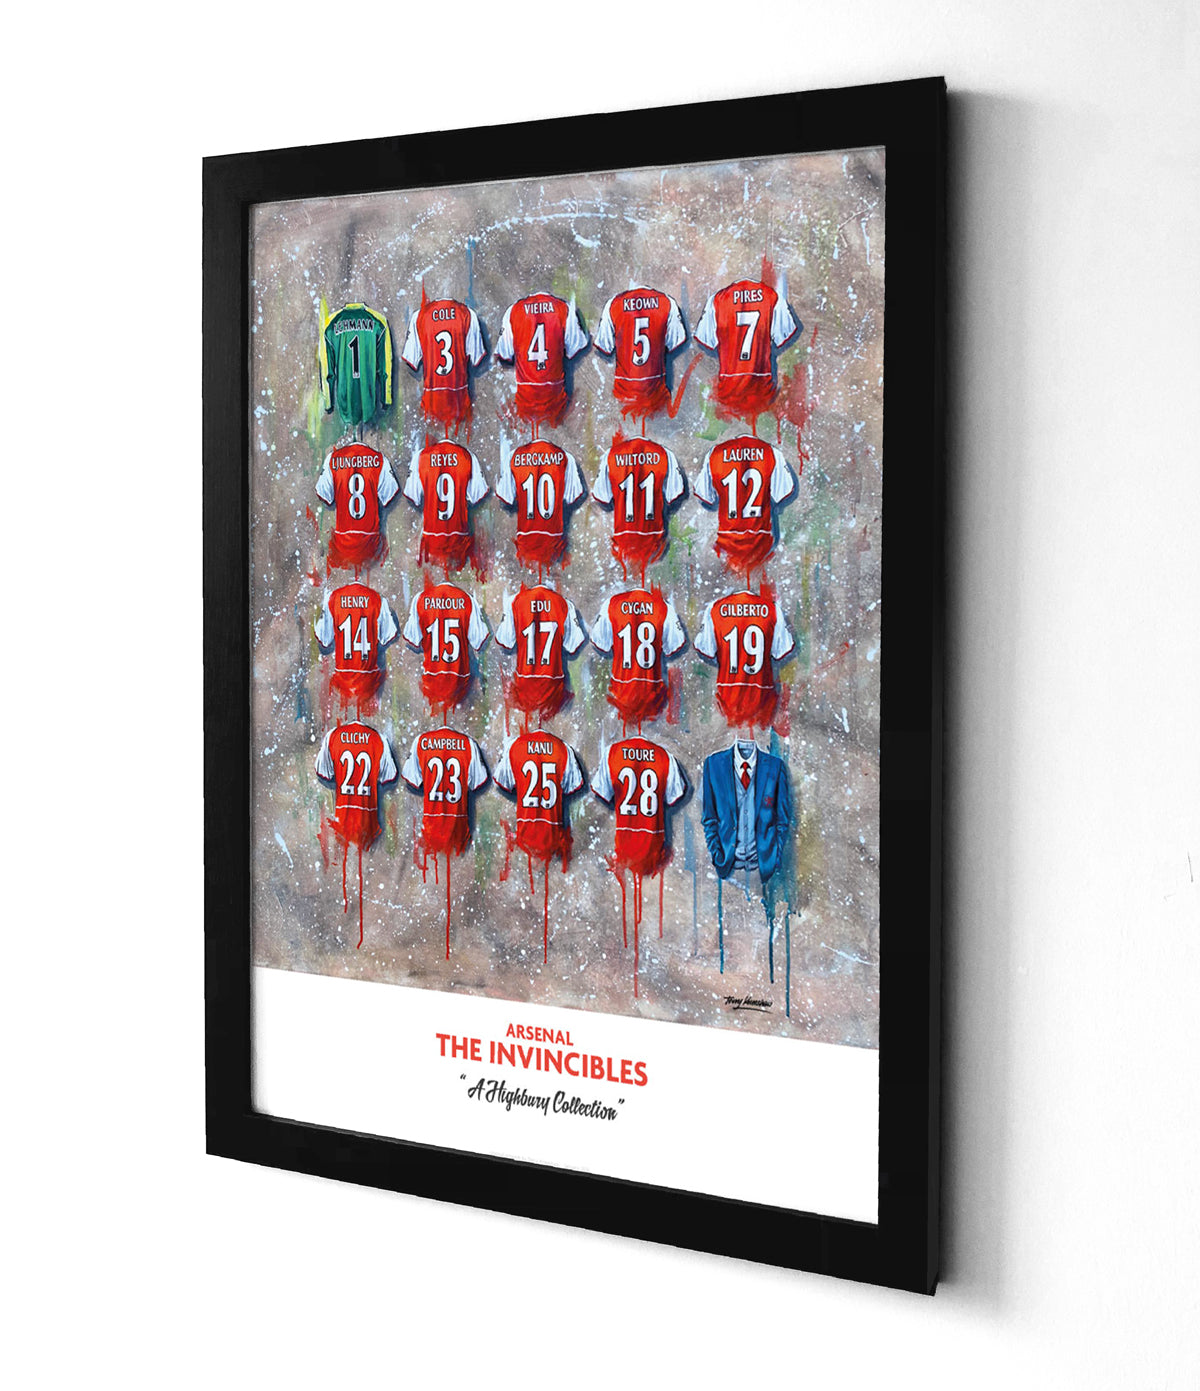 A limited edition A2 size print by Terry Kneeshaw, featuring 20 iconic jerseys from Arsenal's unbeaten 2003-2004 season, known as the Invincibles. The jerseys include the iconic red and white stripes, the Highbury crest, and the names of players like Thierry Henry, Dennis Bergkamp, and Robert Pires. This personalized print makes a great addition to any Arsenal fan's collection.